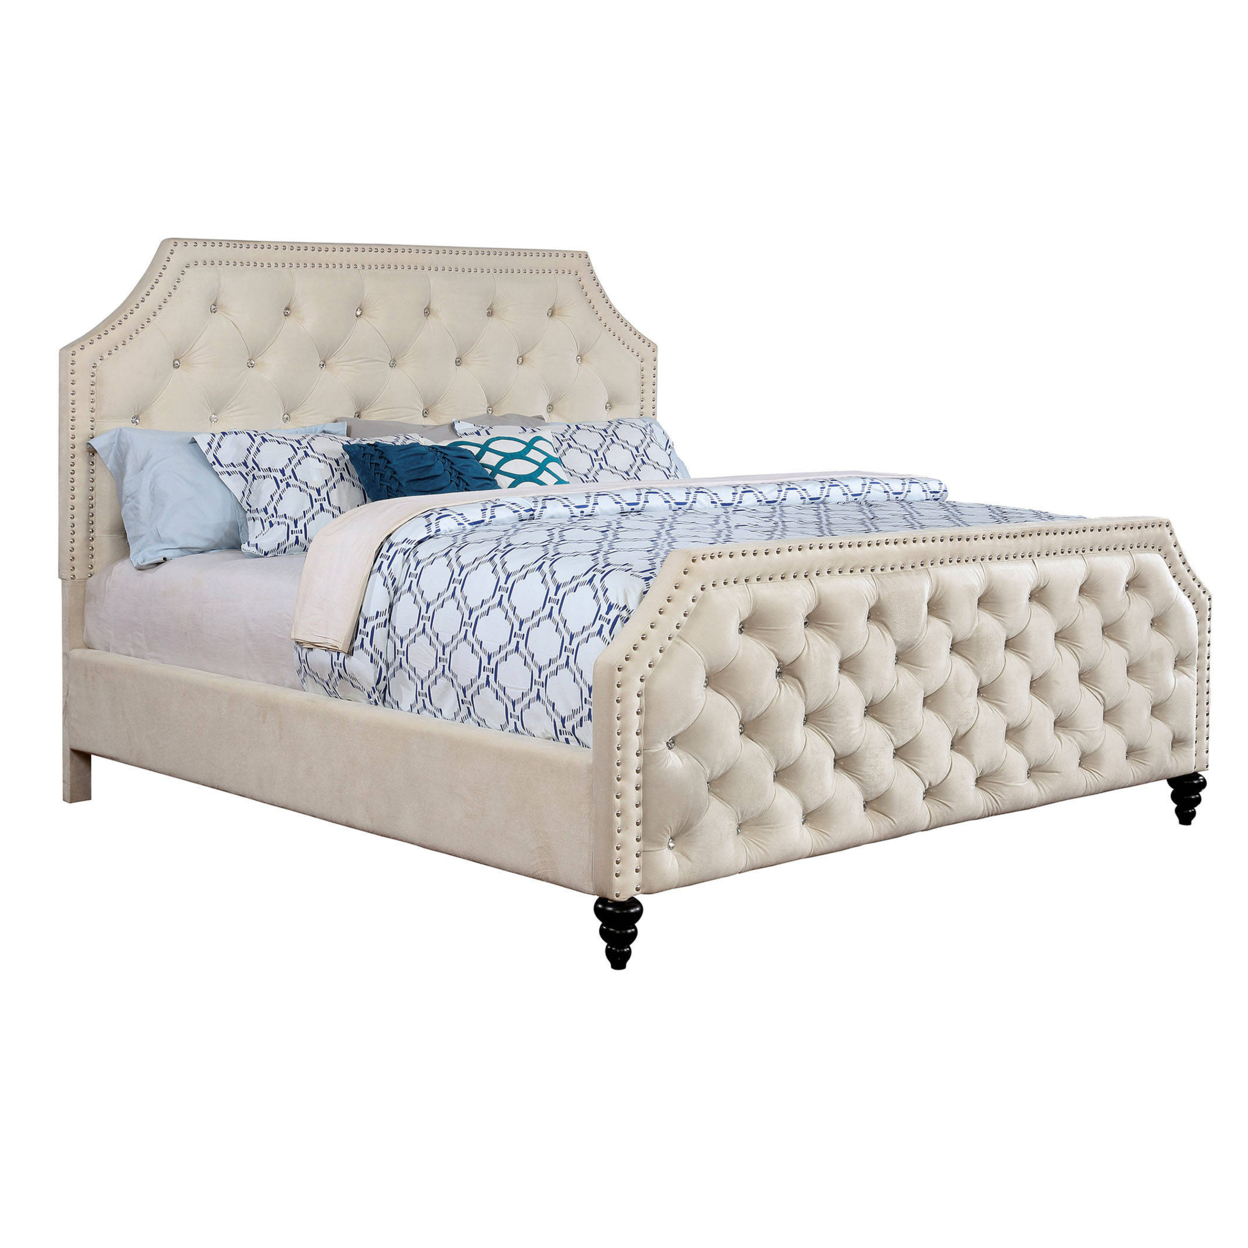 Button Tufted Fabric Upholstered Queen Bed With Corner Cut Design, Beige- Saltoro Sherpi